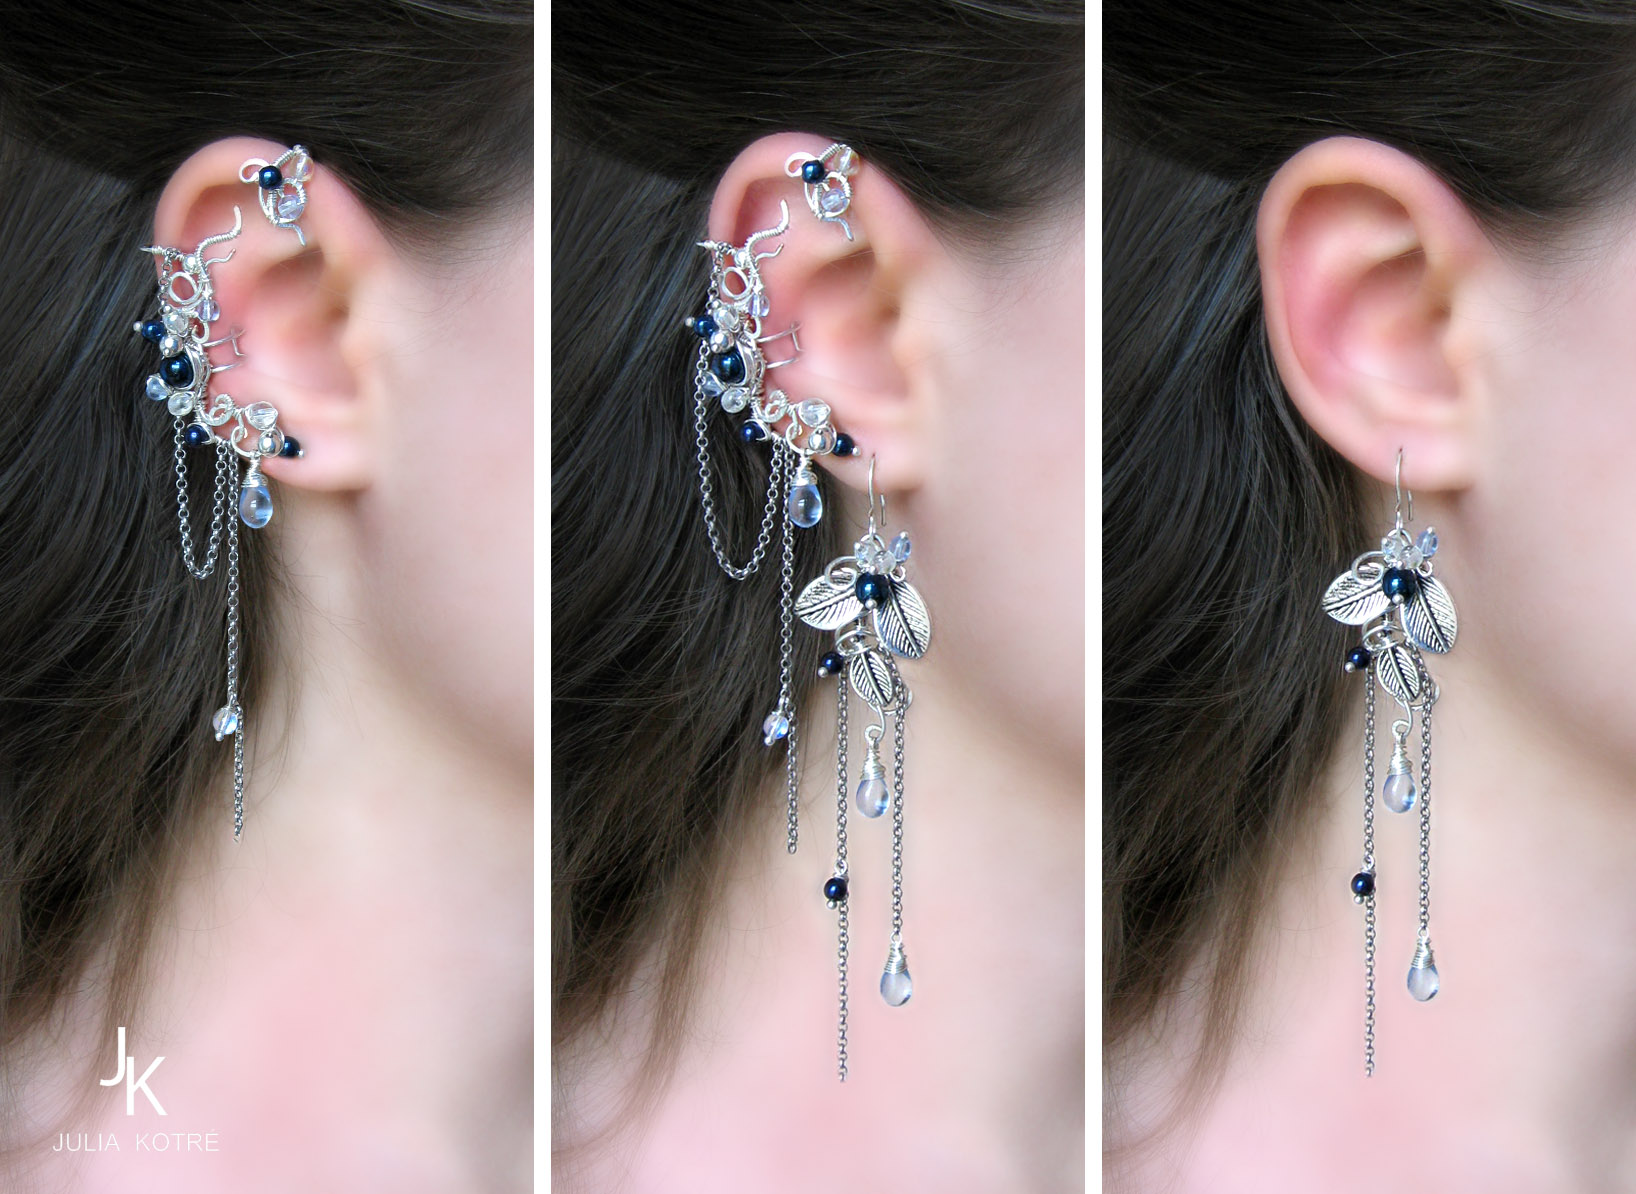 Rain at dawn ear cuff with upper wrap and earrings